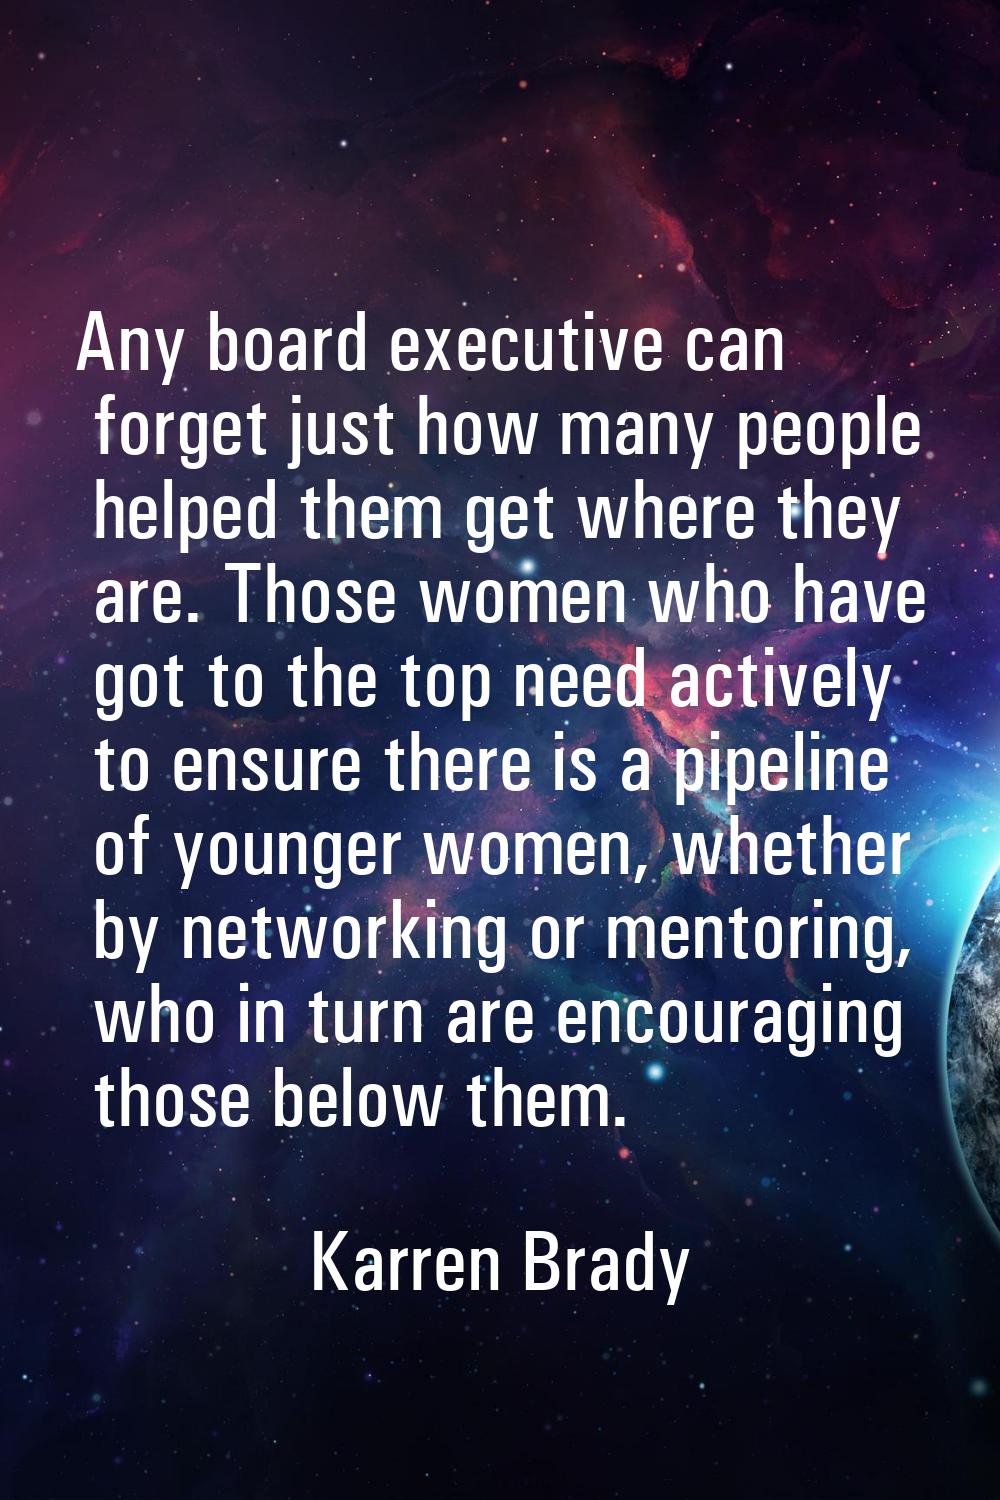 Any board executive can forget just how many people helped them get where they are. Those women who